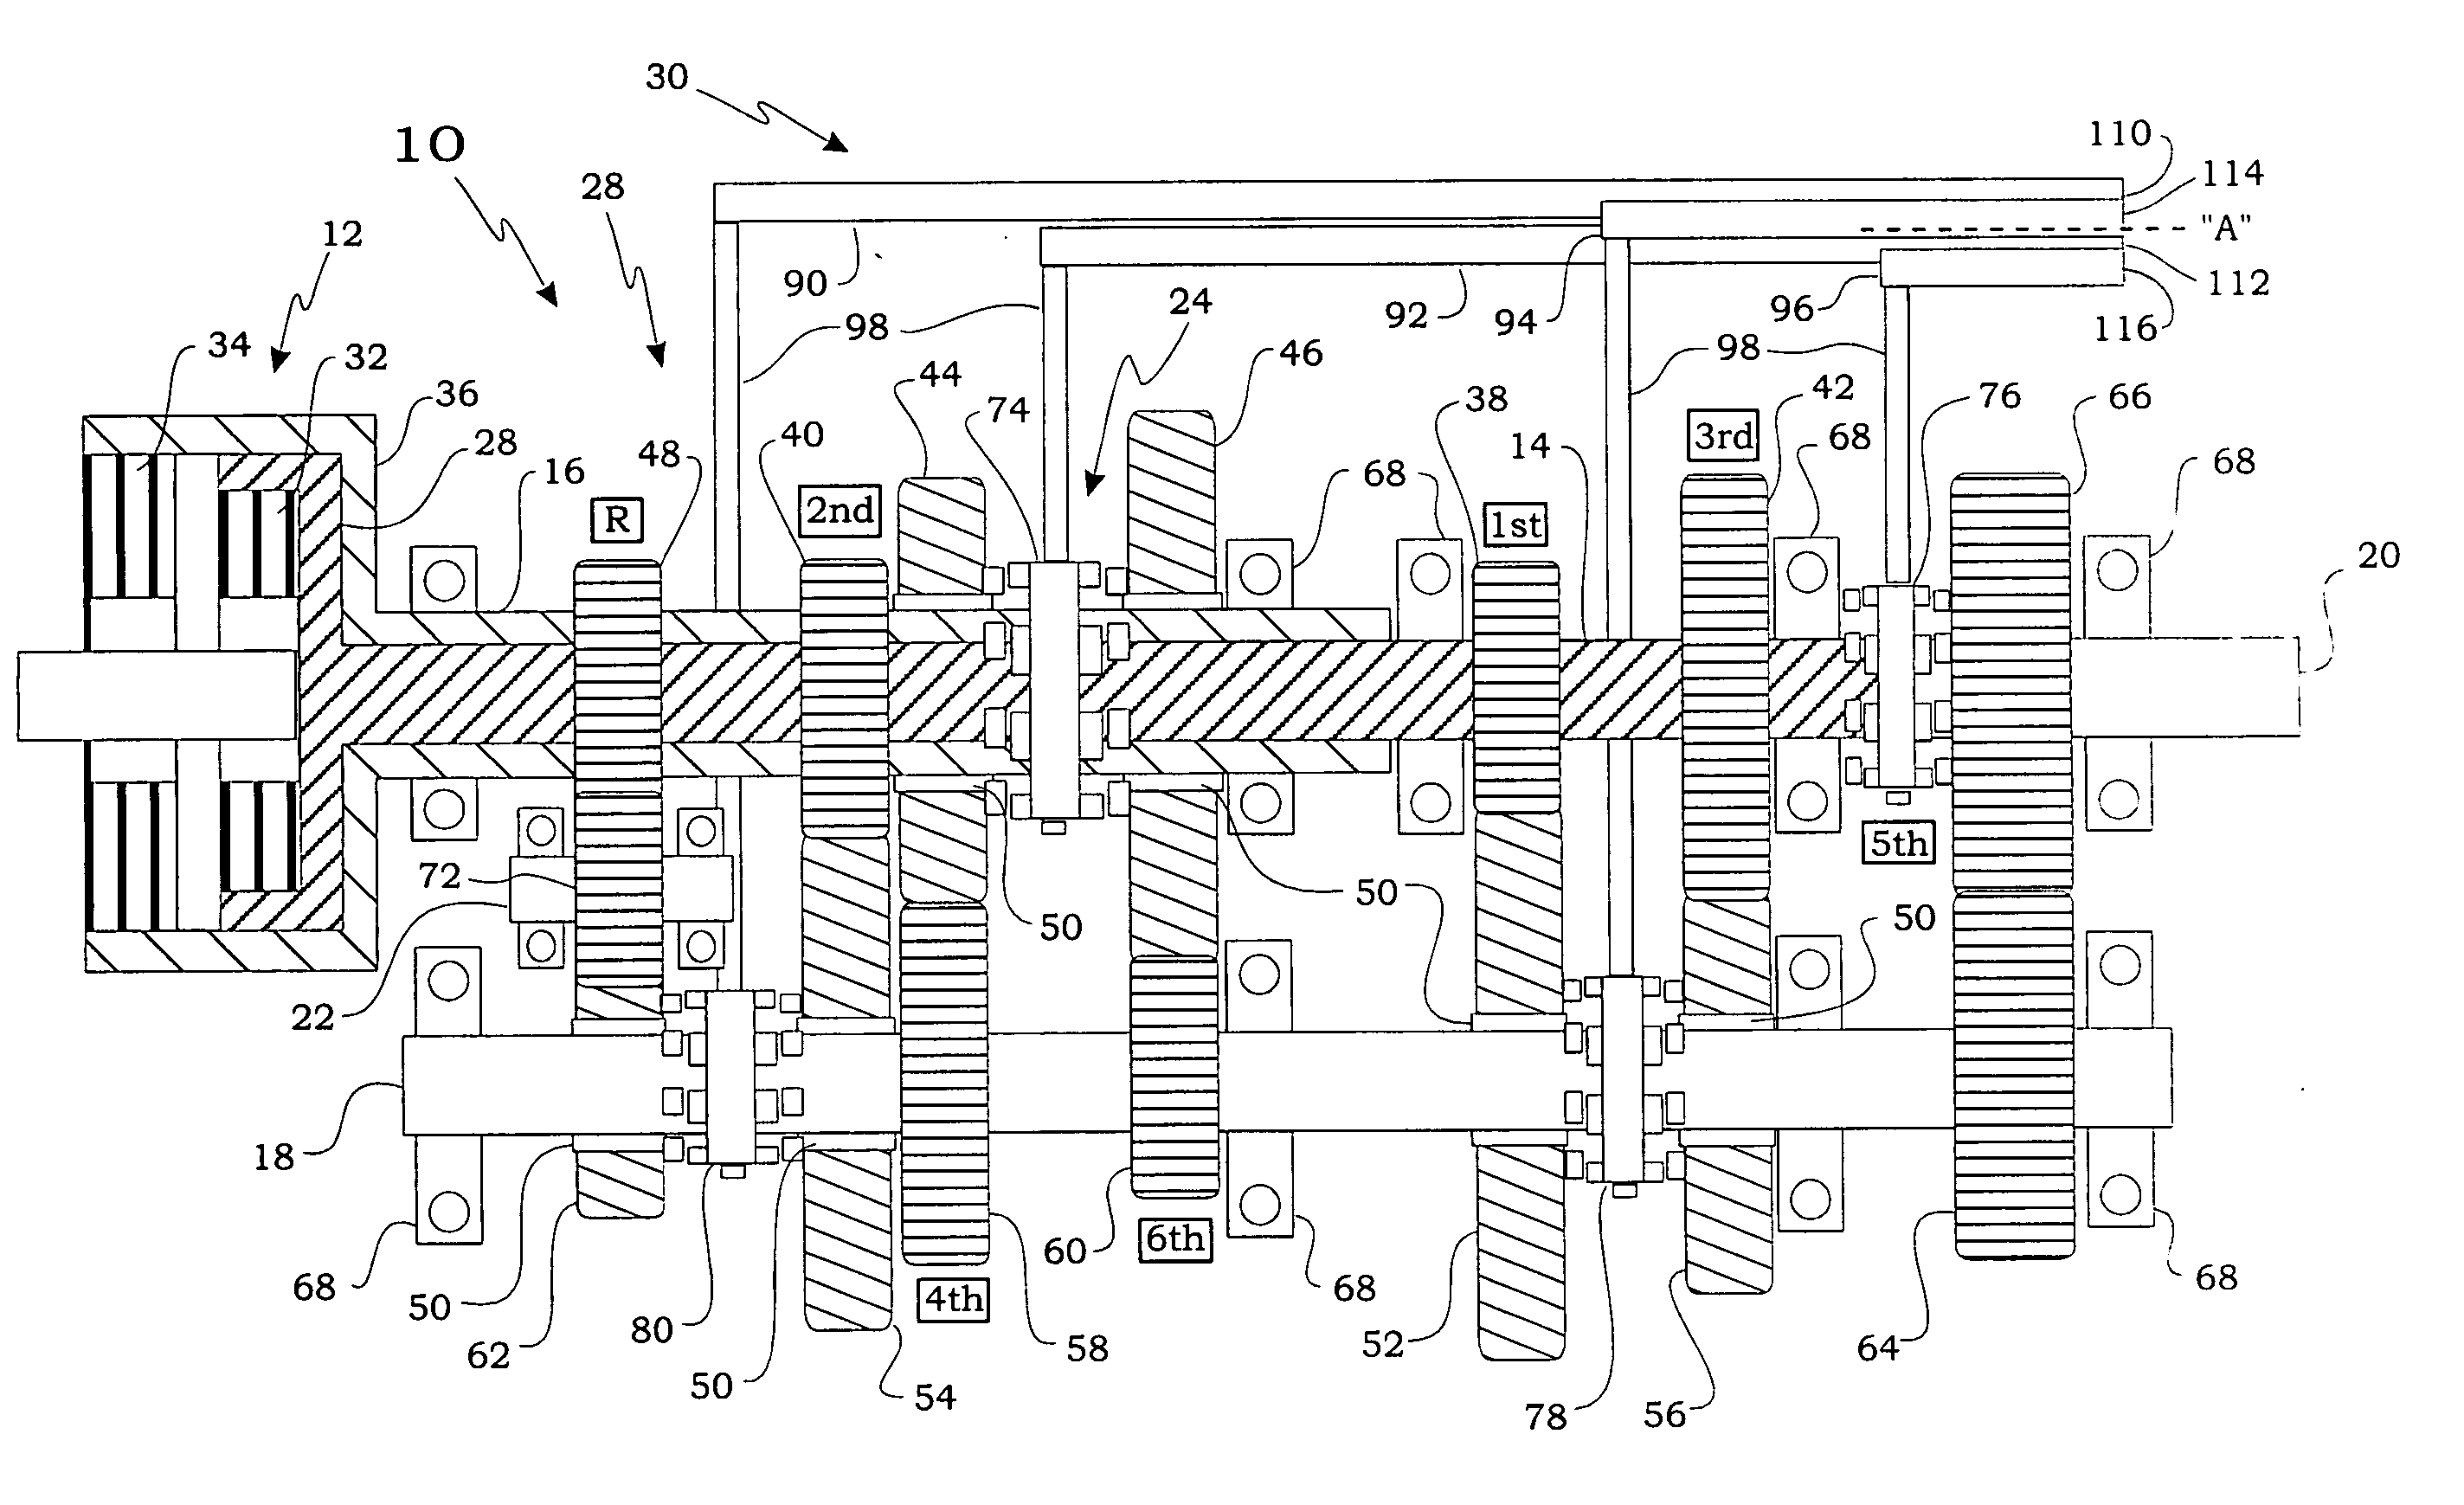 Transmission having an electro-mechanical gear actuation system